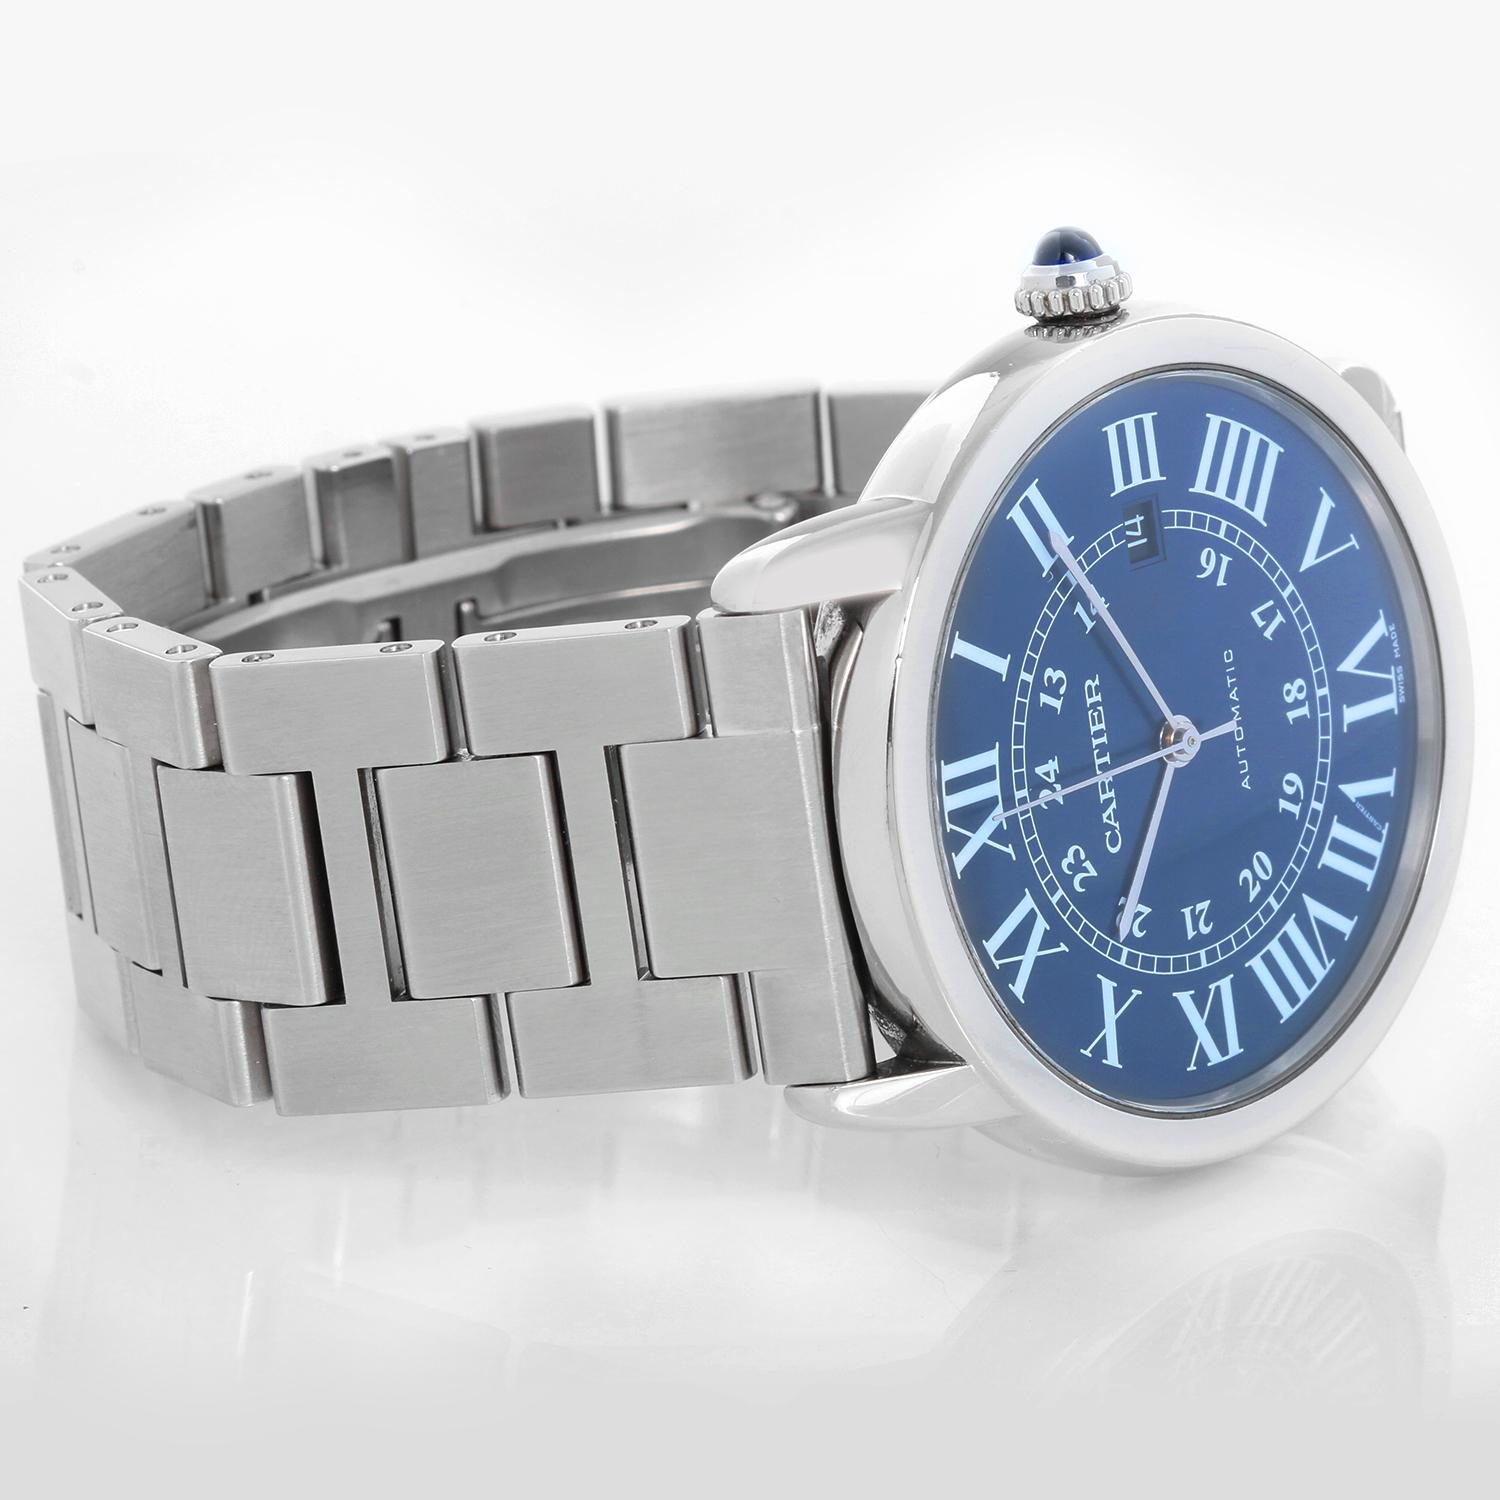 Cartier Solo Ronde  42mm Stainless Steel Quartz Watch WSRN0023 3802 - Automatic. Stainless steel case (42mm diameter). Blue dial with Roman numerals. Stainless steel Cartier bracelet; will fit a 7 inch wrist. Pre-owned with custom box.